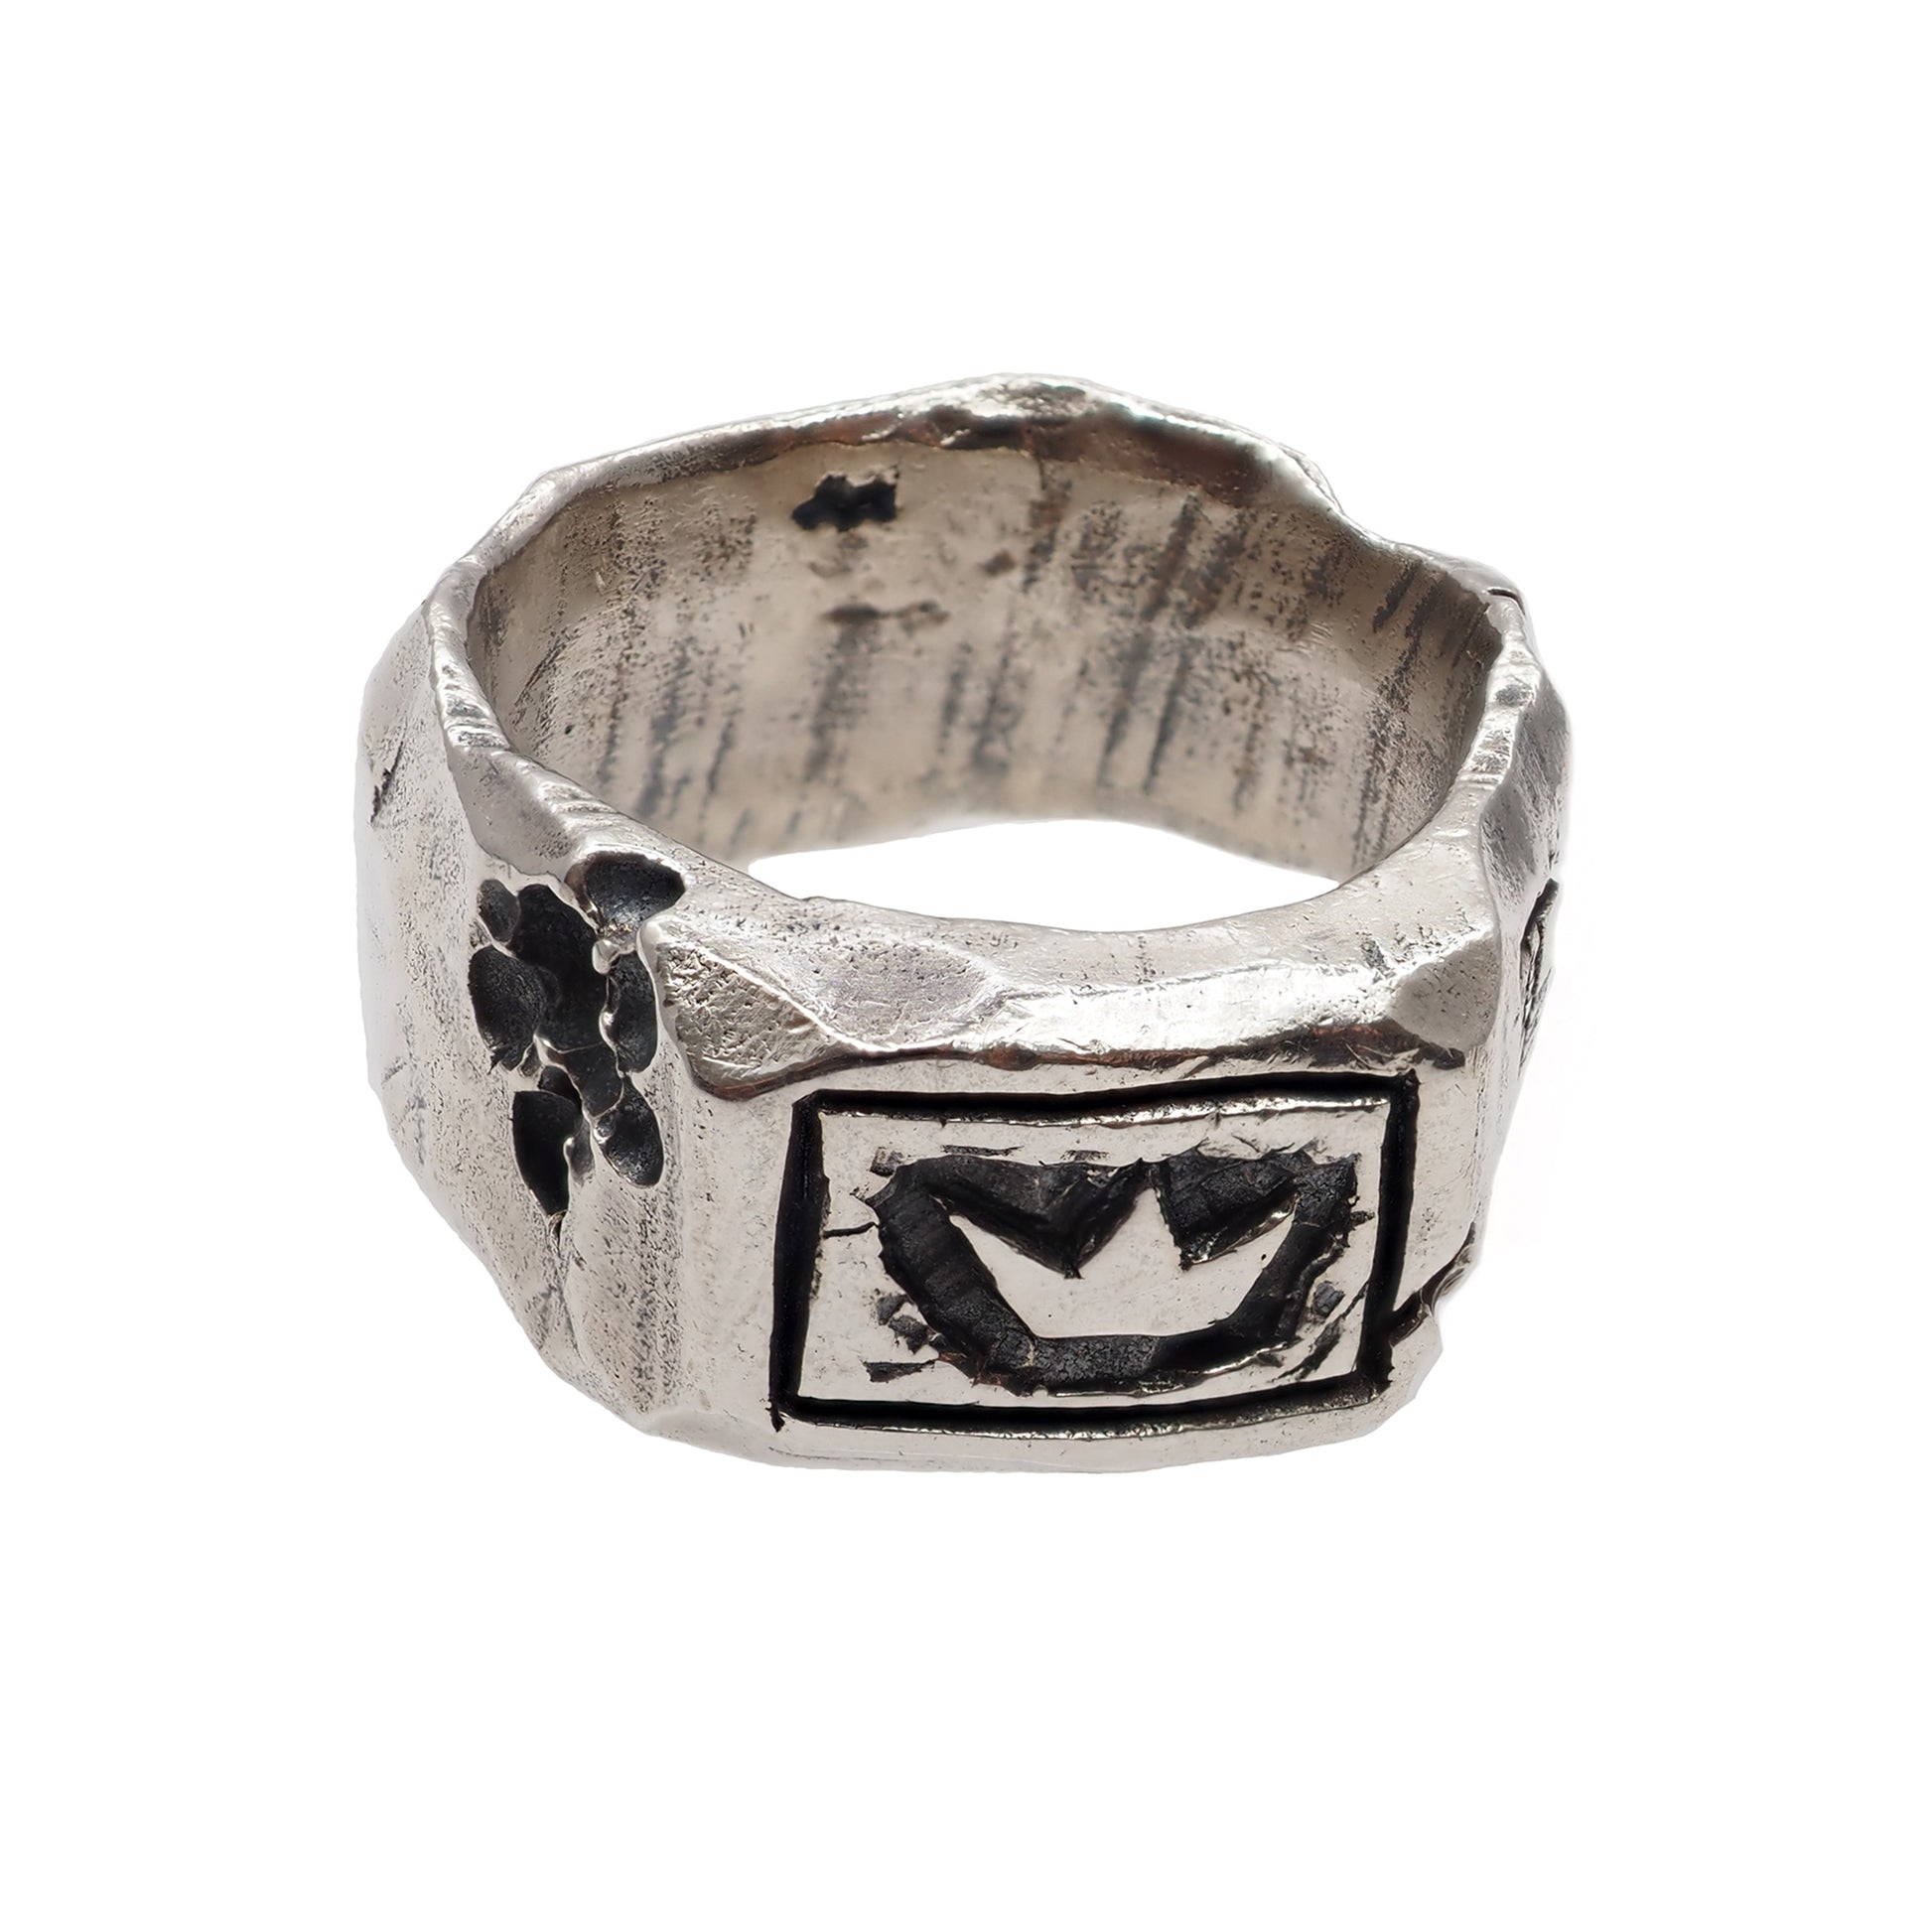 Silver ring of King Arthur with a crown in the foreground and a decorative carved lava flow structure on the left on a white background